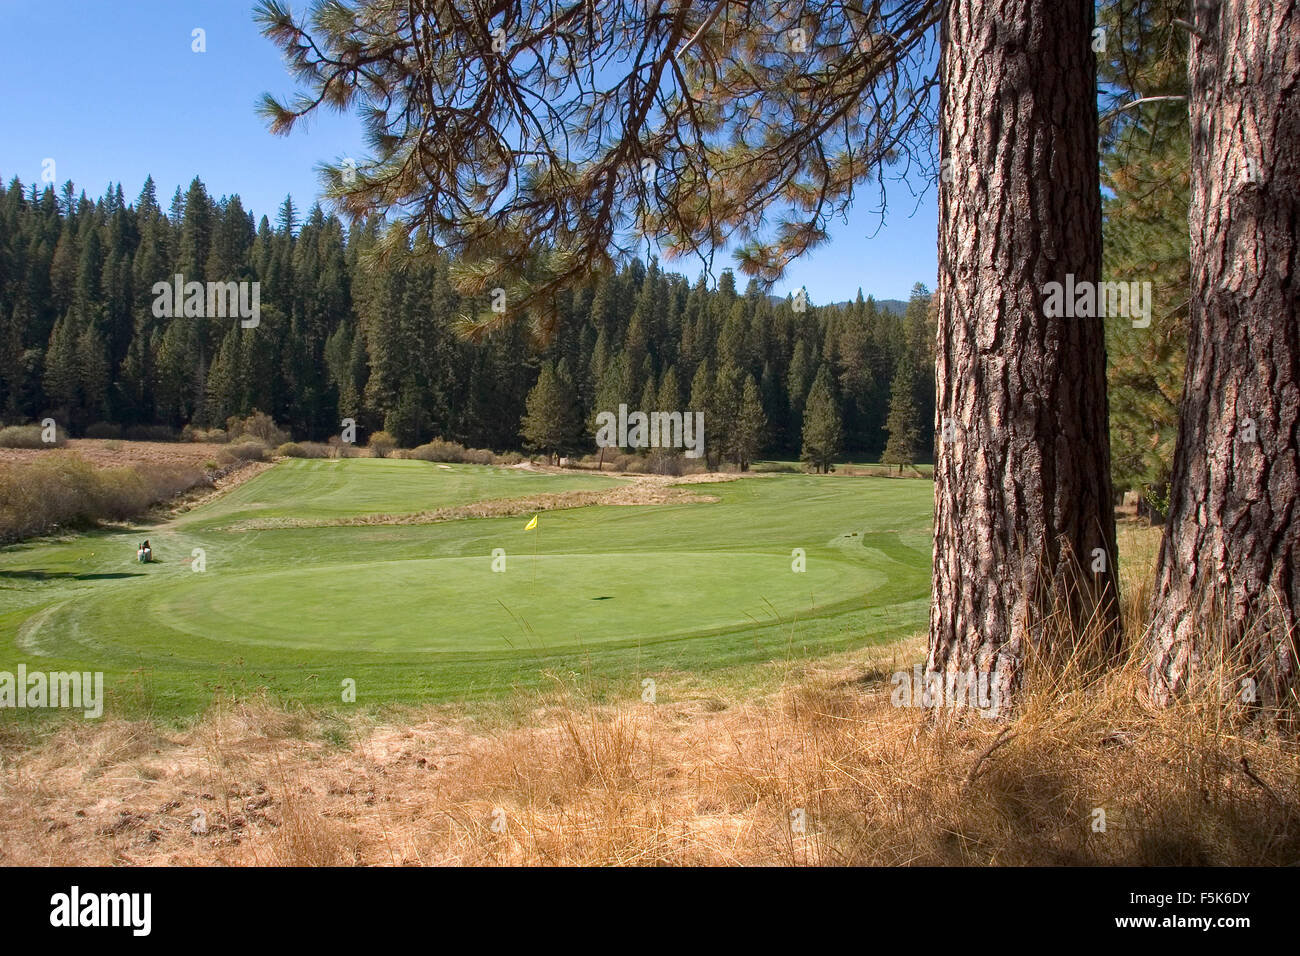 Dec 01, 2005; Wawona, CA, USA; Yosemite's Wawona Golf Course was the first regulation course in the Sierra Nevada when it opened in 1918 -- and has provided golfers challenging but rewarding rounds ever since. It was designed by Walter Fovargue to blend seamlessly into its spectacular surroundings. The nine-hole, par-35 course measures 3,050 yards and includes two par five holes and three par three holes. Different tee positions per side provide a par 70, 18-hole format. Golfers of every level enjoy the rolling terrain, variety of challenging holes and tranquil setting of this historic course. Stock Photo